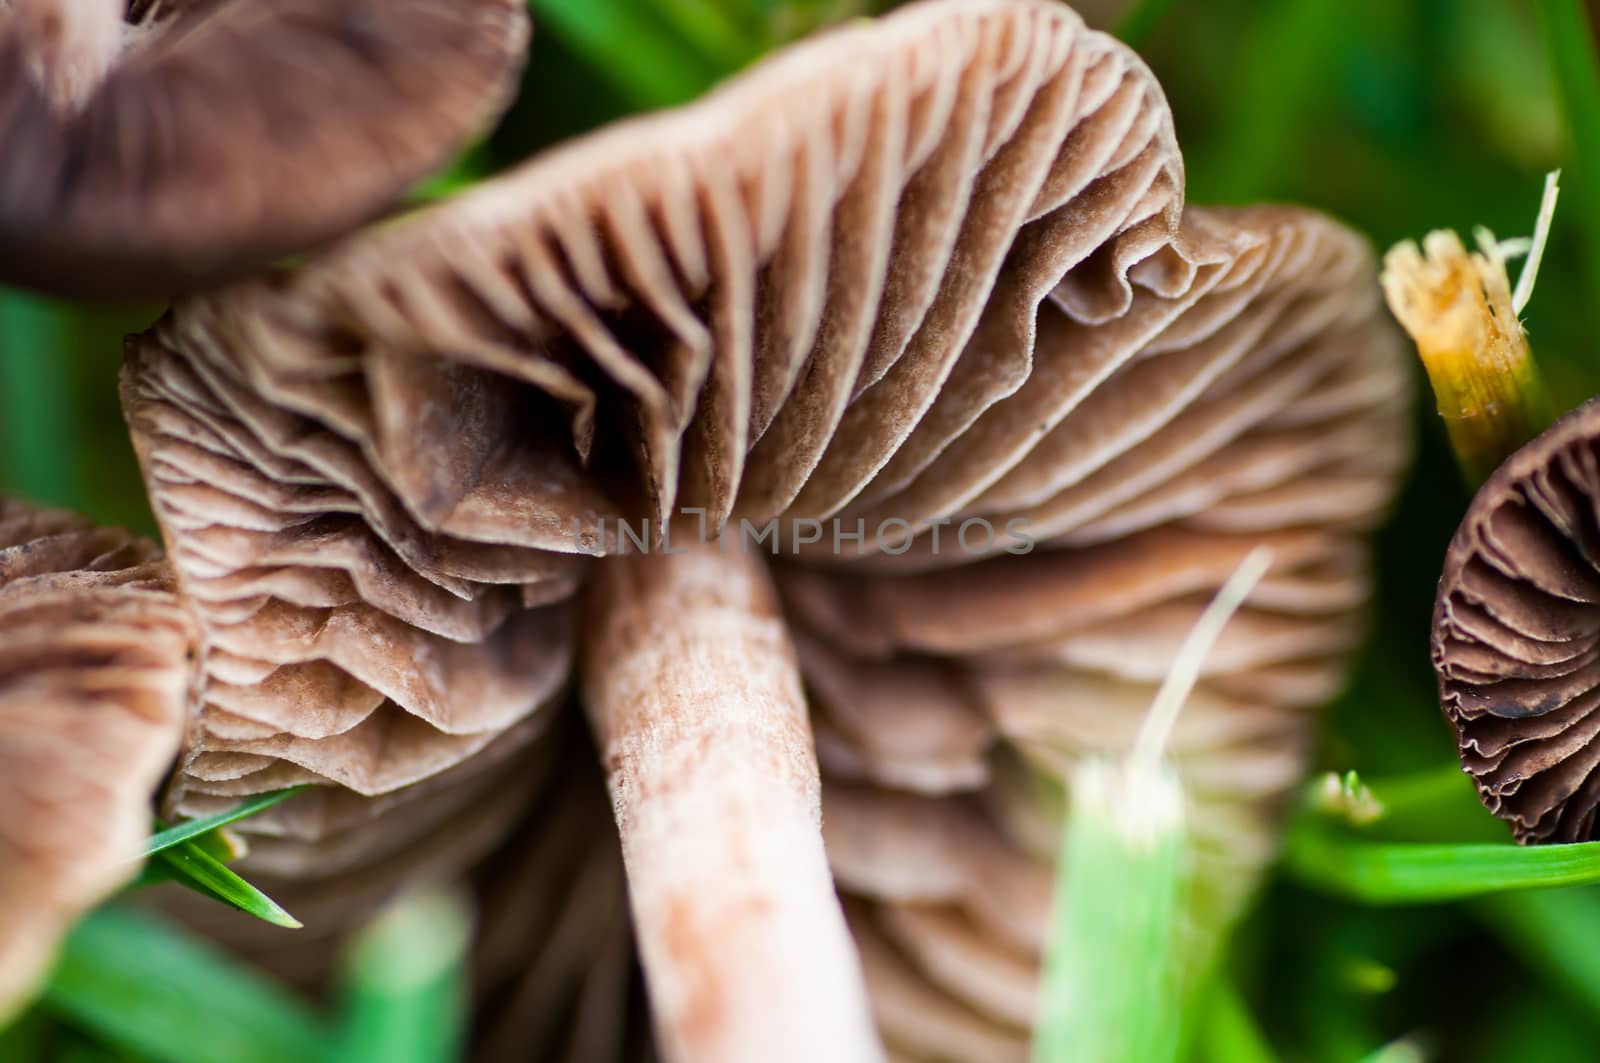 Close up view of Mushrooms in the Grass